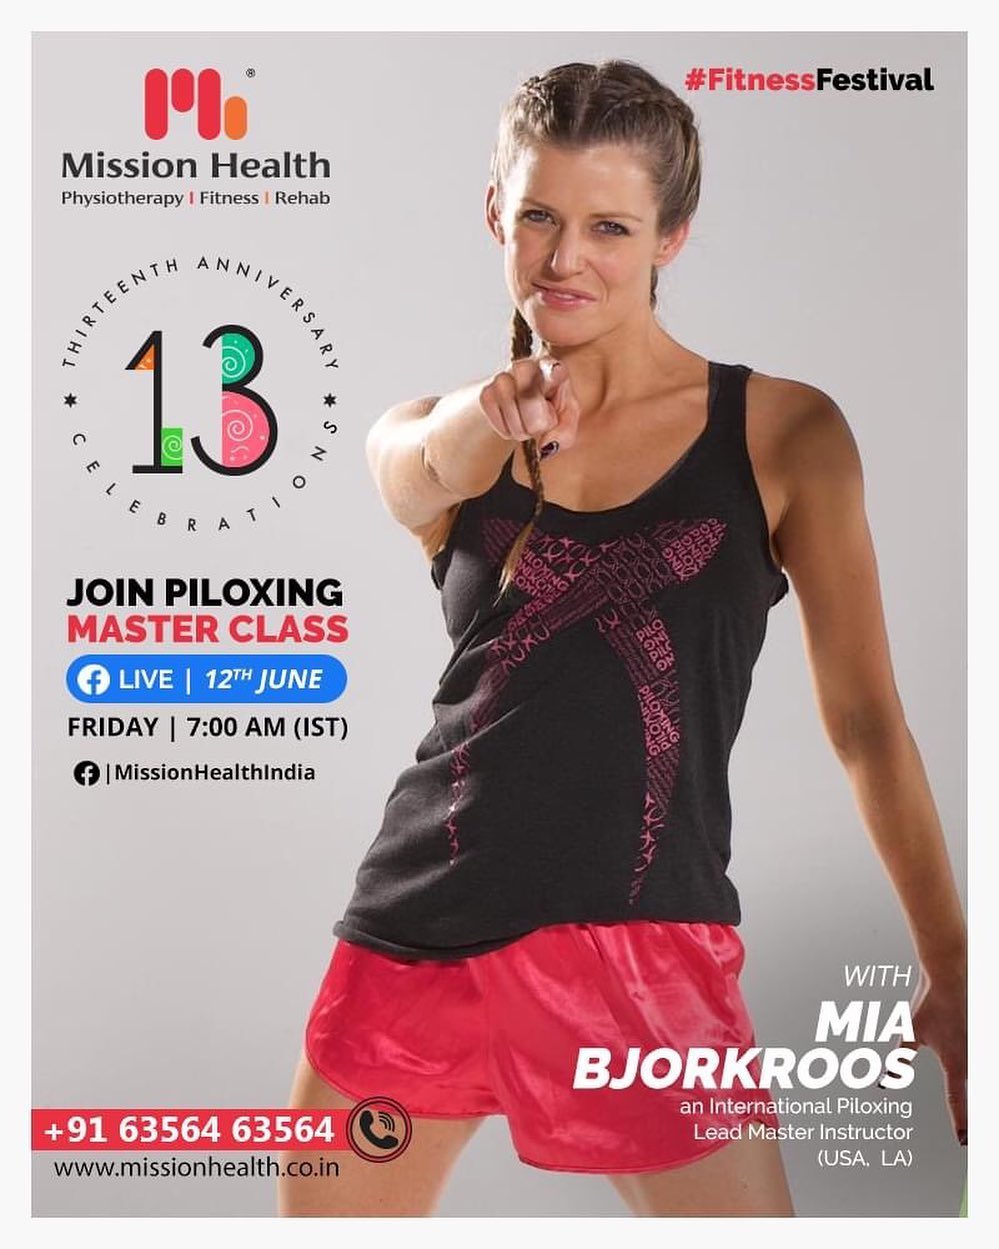 On the occasion of our 13th Anniversary,  as a part of the Fitness Festival, we are more than excited to announce a first of its kind , live Piloxing Master Class (Pilates + Kick Boxing)  with the International Piloxing Lead Master Instructor from Los Angeles, Mia Bjorkroos.

Mia is a thought leader, educator, and speaker in the fitness industry with a passion for inspiring and helping people to live fit and healthy lives through unique concepts and expertise. She has an international network as well as a 360 perspective of the fitness industry. 
Be ready in your fitness Gear and tune-in https://www.facebook.com/MissionHealthIndia sharp at 7 am, Friday, 12th June to workout with the International Master Trainer. 
It's the Piloxing Master Class.  Don't miss it. Save the date now! 
Call: +91 63564 63564
www.missionhealth.co.in

#fitnessfestival #anniversarycelebrations #miabjorkroos #piloxing #piloxingfitness #piloxinglive #missionhealthfoundationday #fitnesssession #fitness #befit #healthylifestyle #livehealthy #fitnessgoals #cardioworkout #workout #fatloss #inchloss #weightloss #strengthtraining #strengthbuilding #fitnessworkouts #fitness2020 #movementislife #missionhealth #MissionHealthIndia